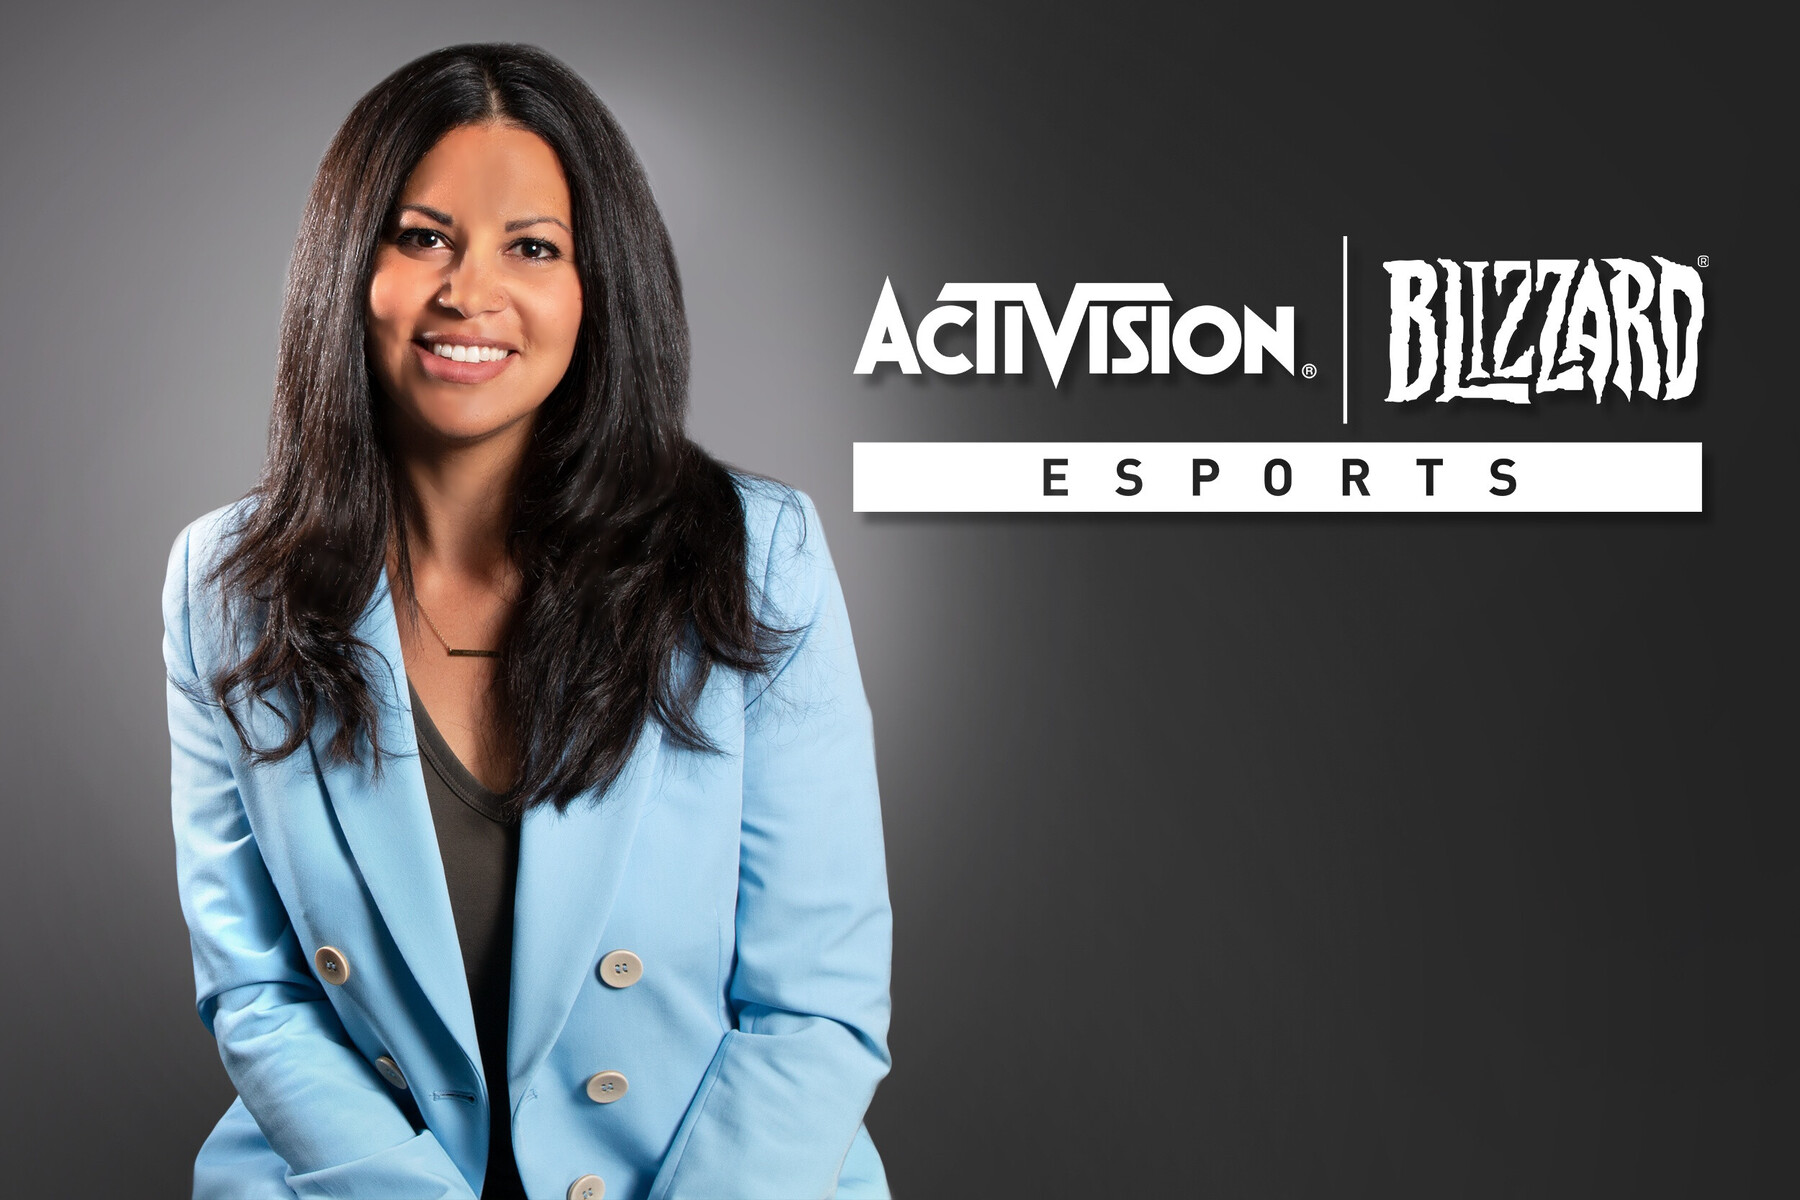 Blizzard Entertainment Appoints Johanna Faries as New President: A Game-Changing Move